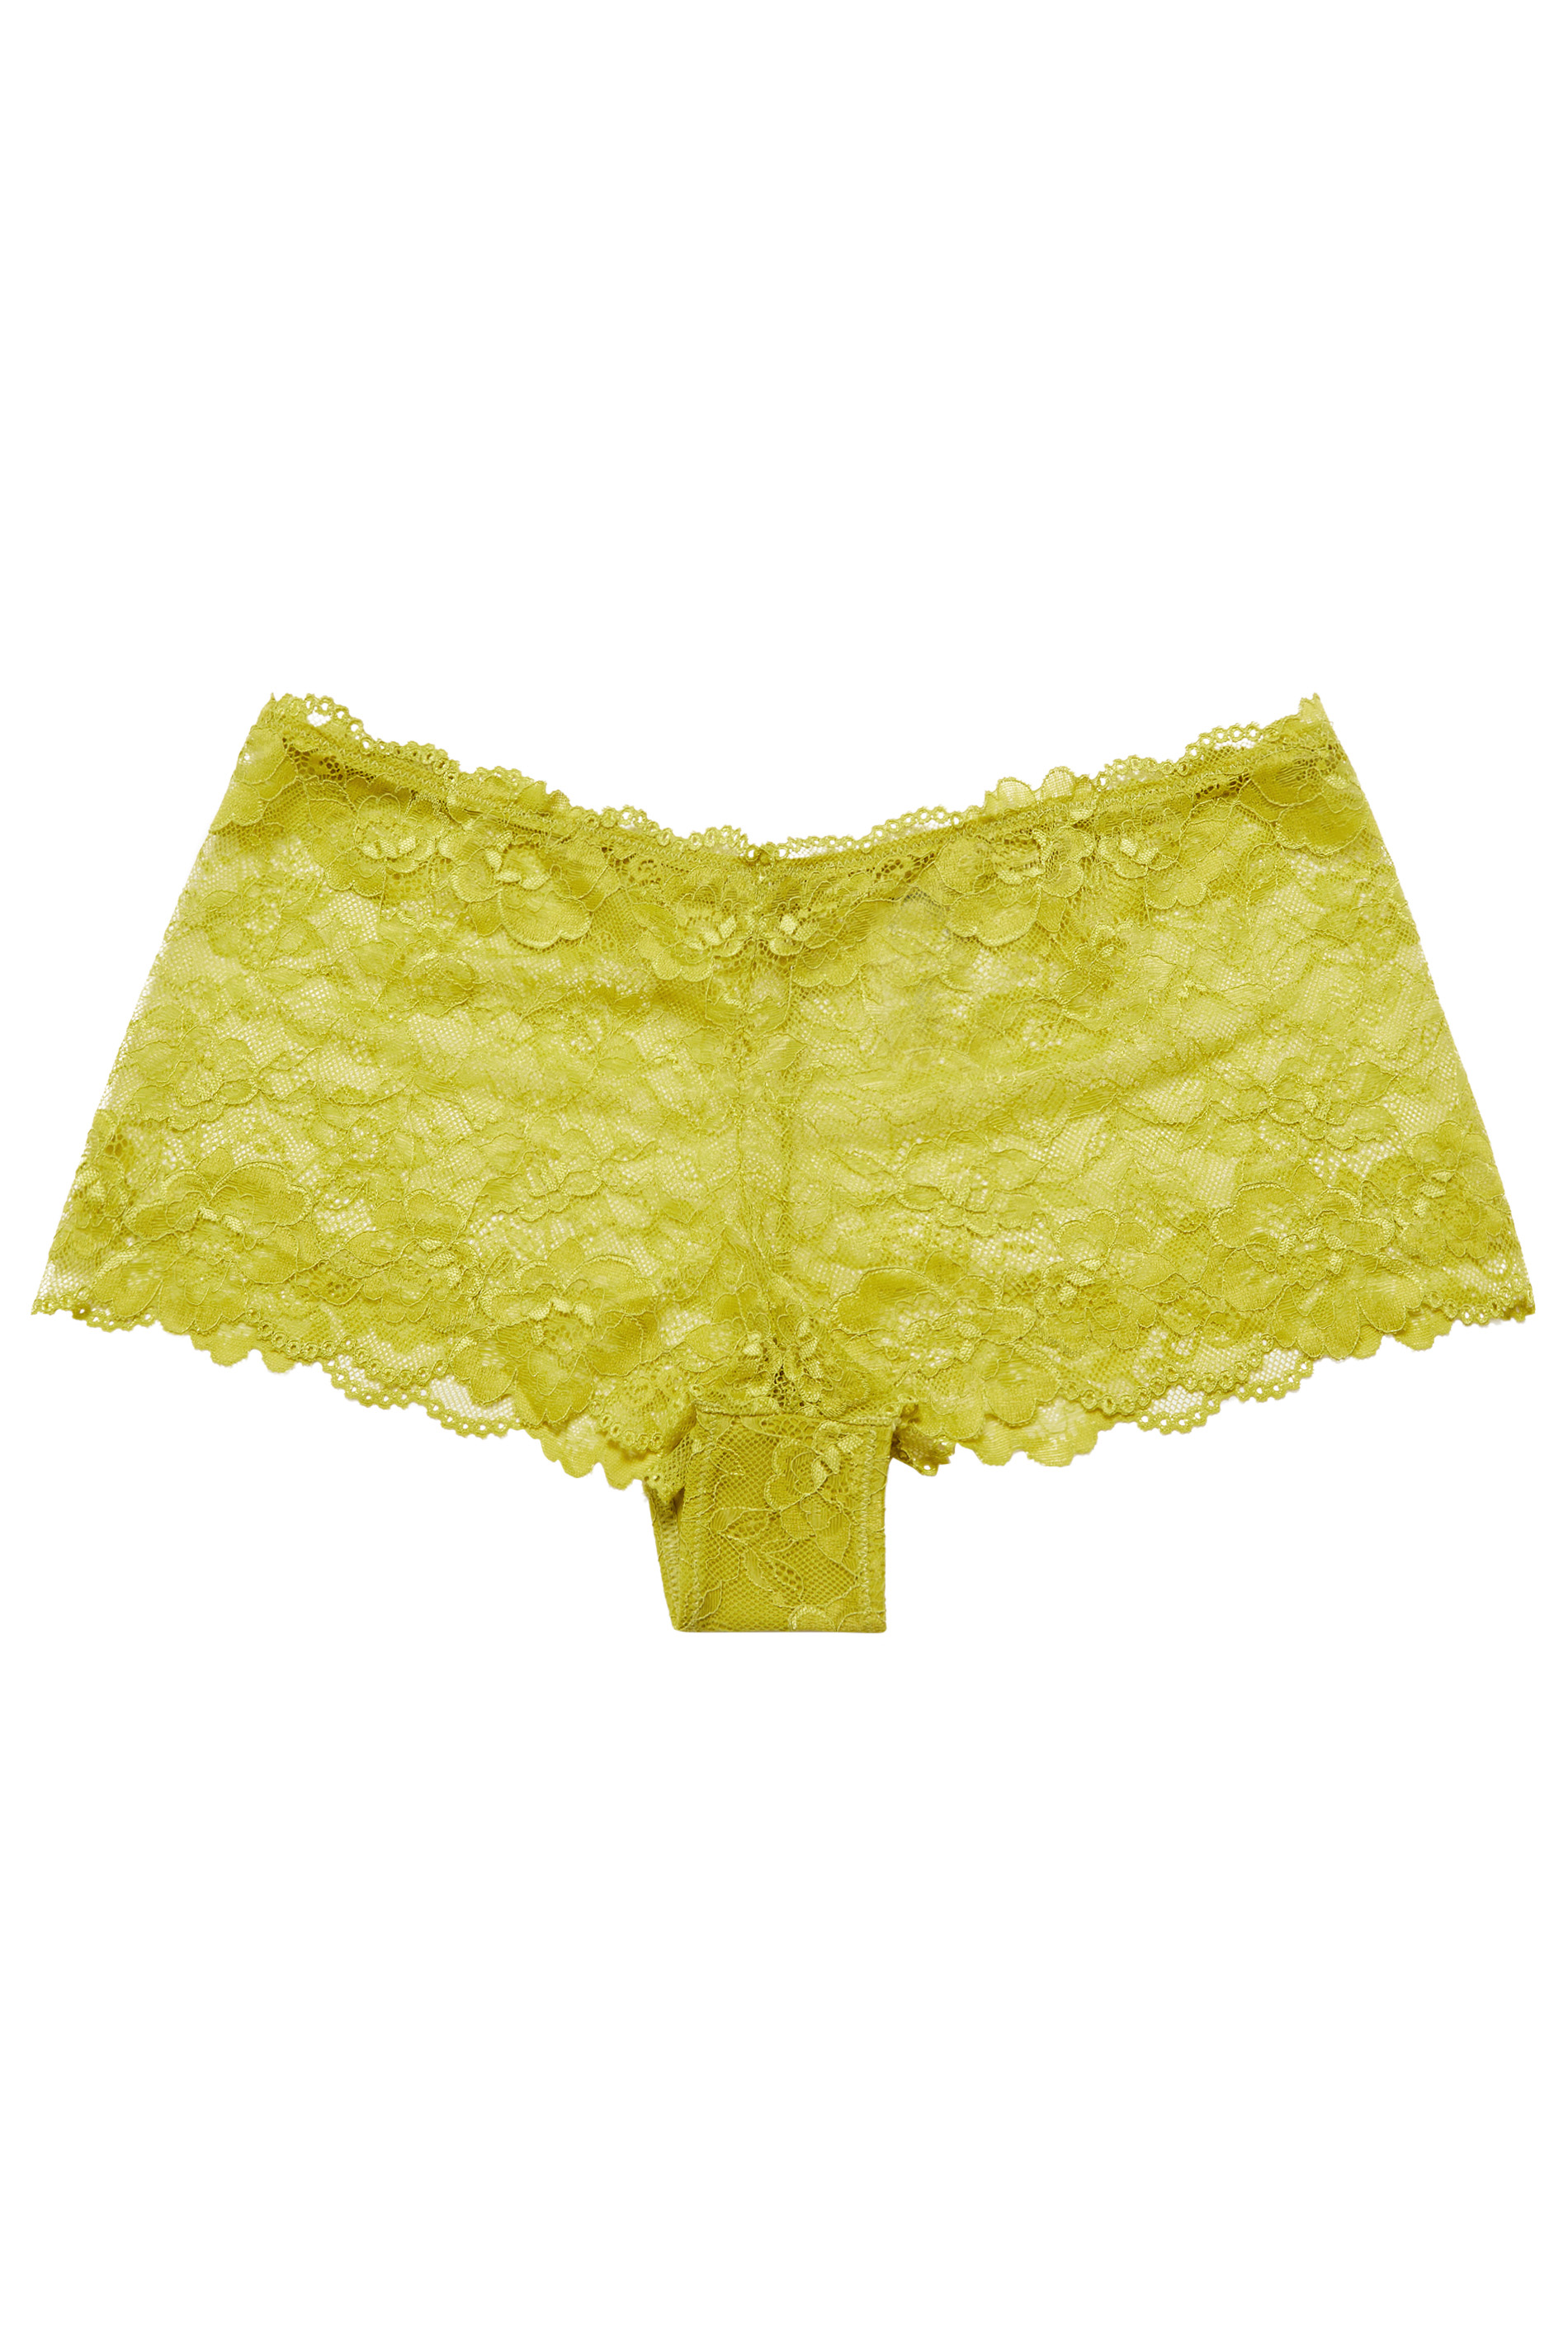 Evans Yellow Lace Brief Shorts 2